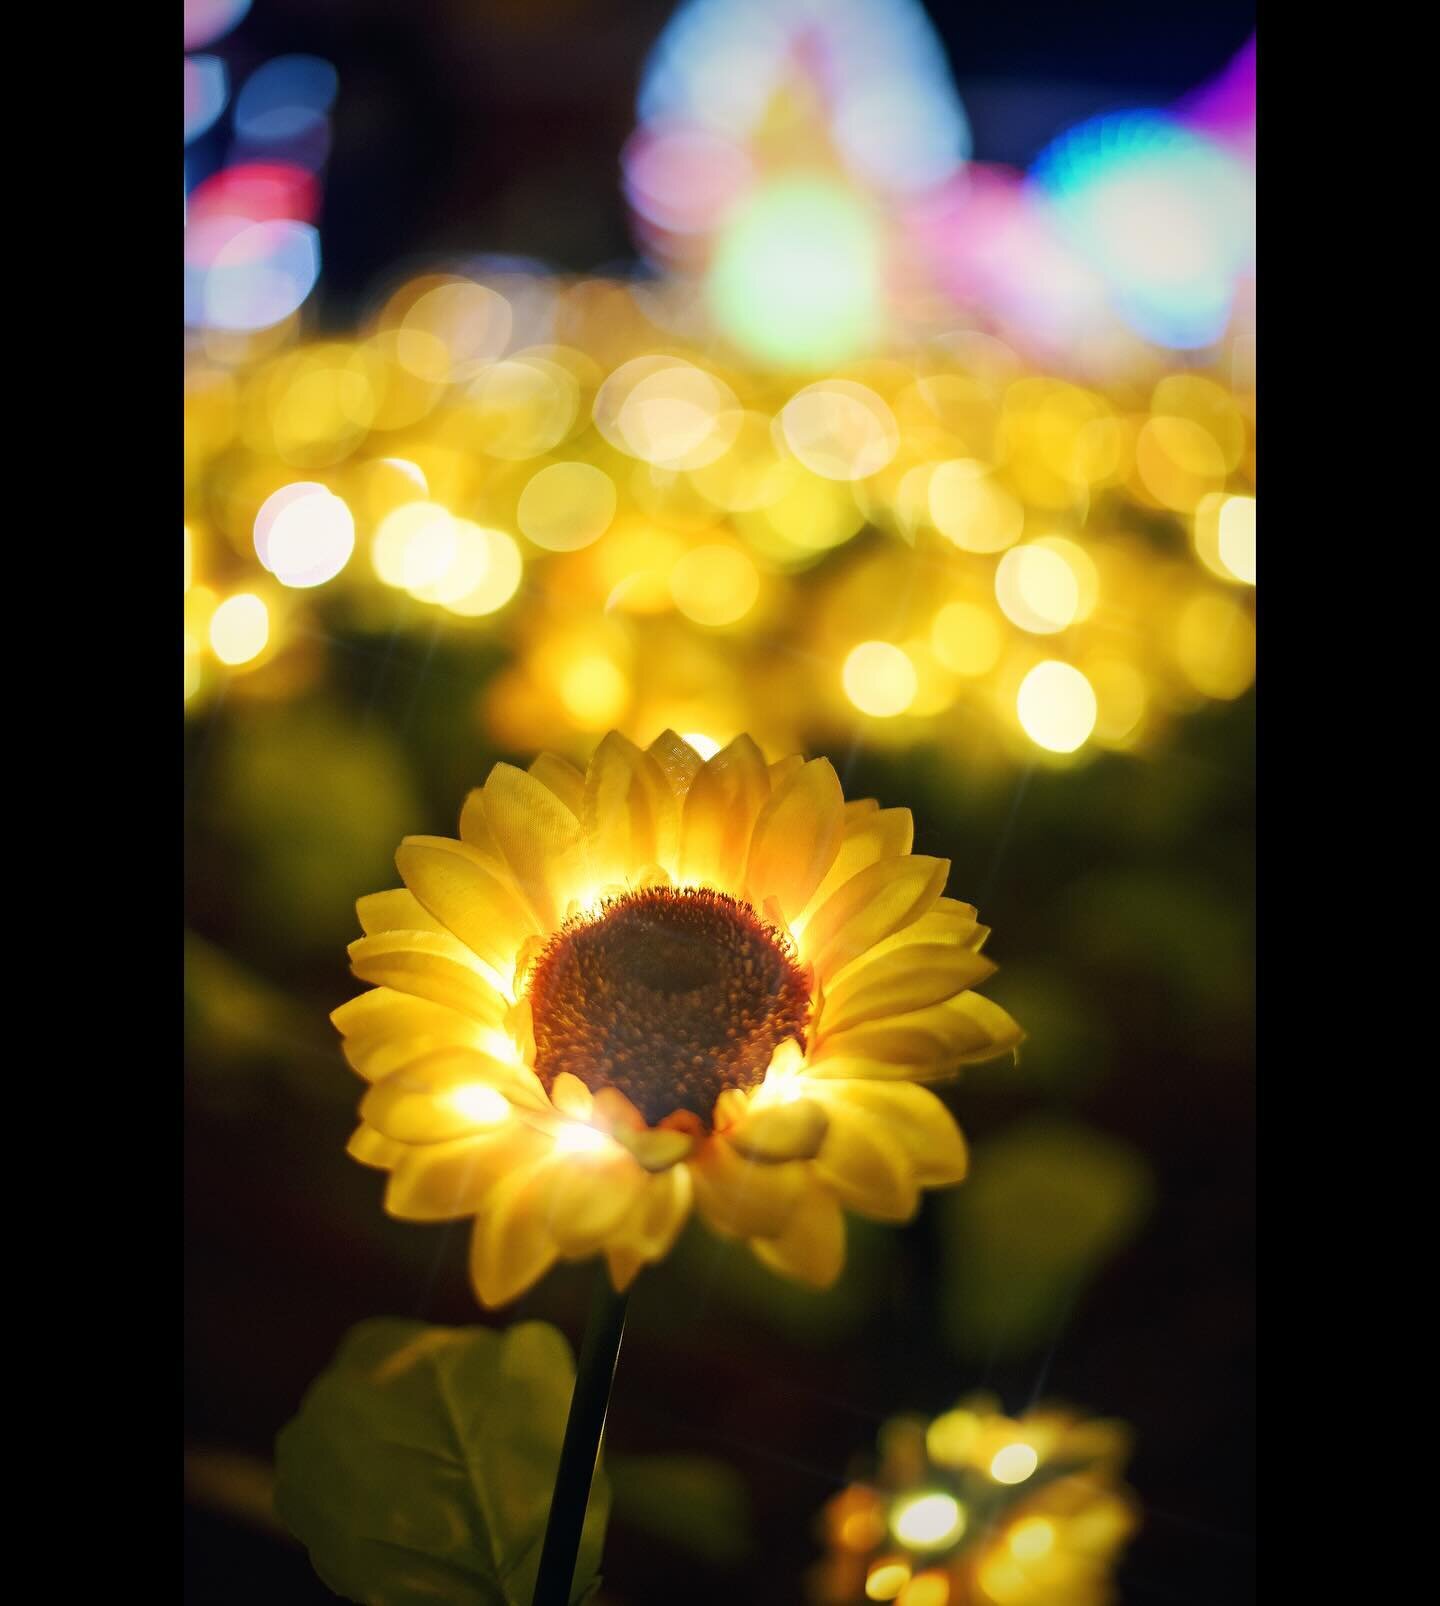 This field of flowers at the Imaginarium was so cool! @castatefair 
.
#photography #photographer #auburn #colfax #sacramento #foresthill #foresthillbridge #placercounty #california #norcal #goldcountry #sunrise #landscape #landscapephotography #sierr